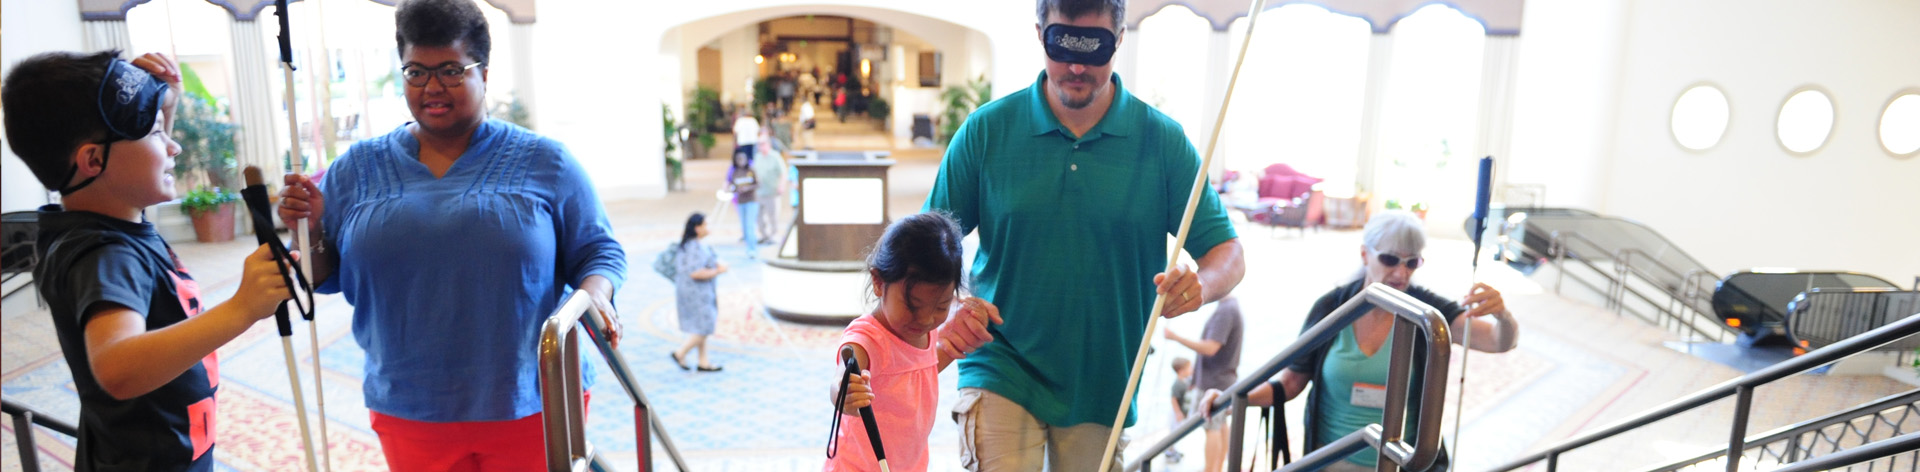 During and O&M training a blind child leads her father up the stairs with her long white cane. Her father wears sleepshades and also uses a cane.